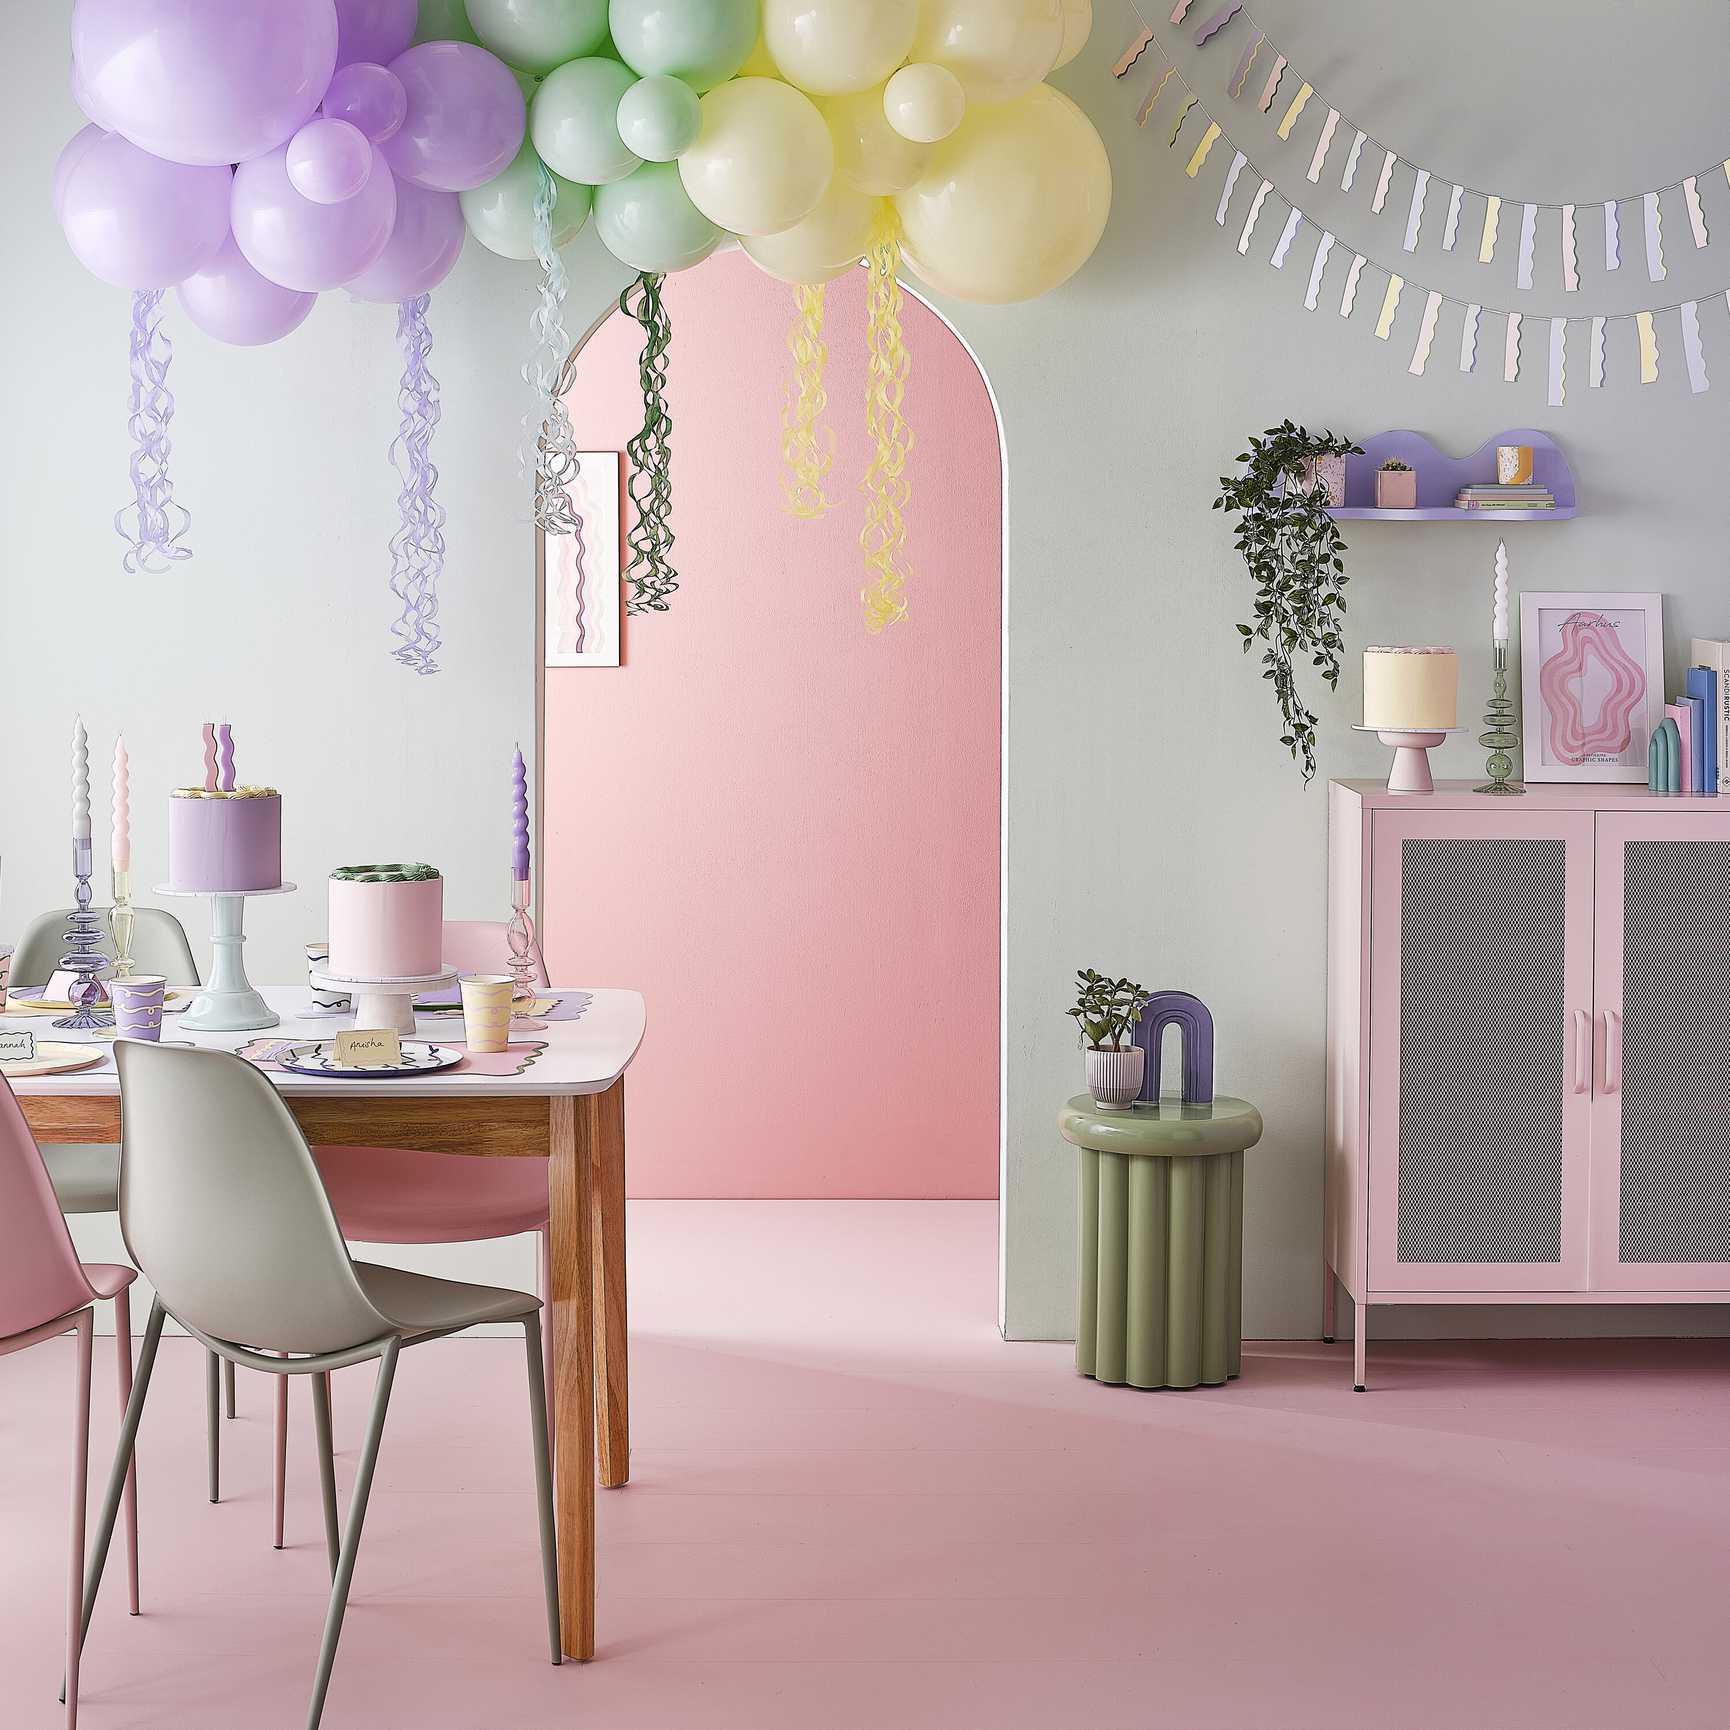 Pastel Party Decorations and Pastel Party Supplies – Little Big